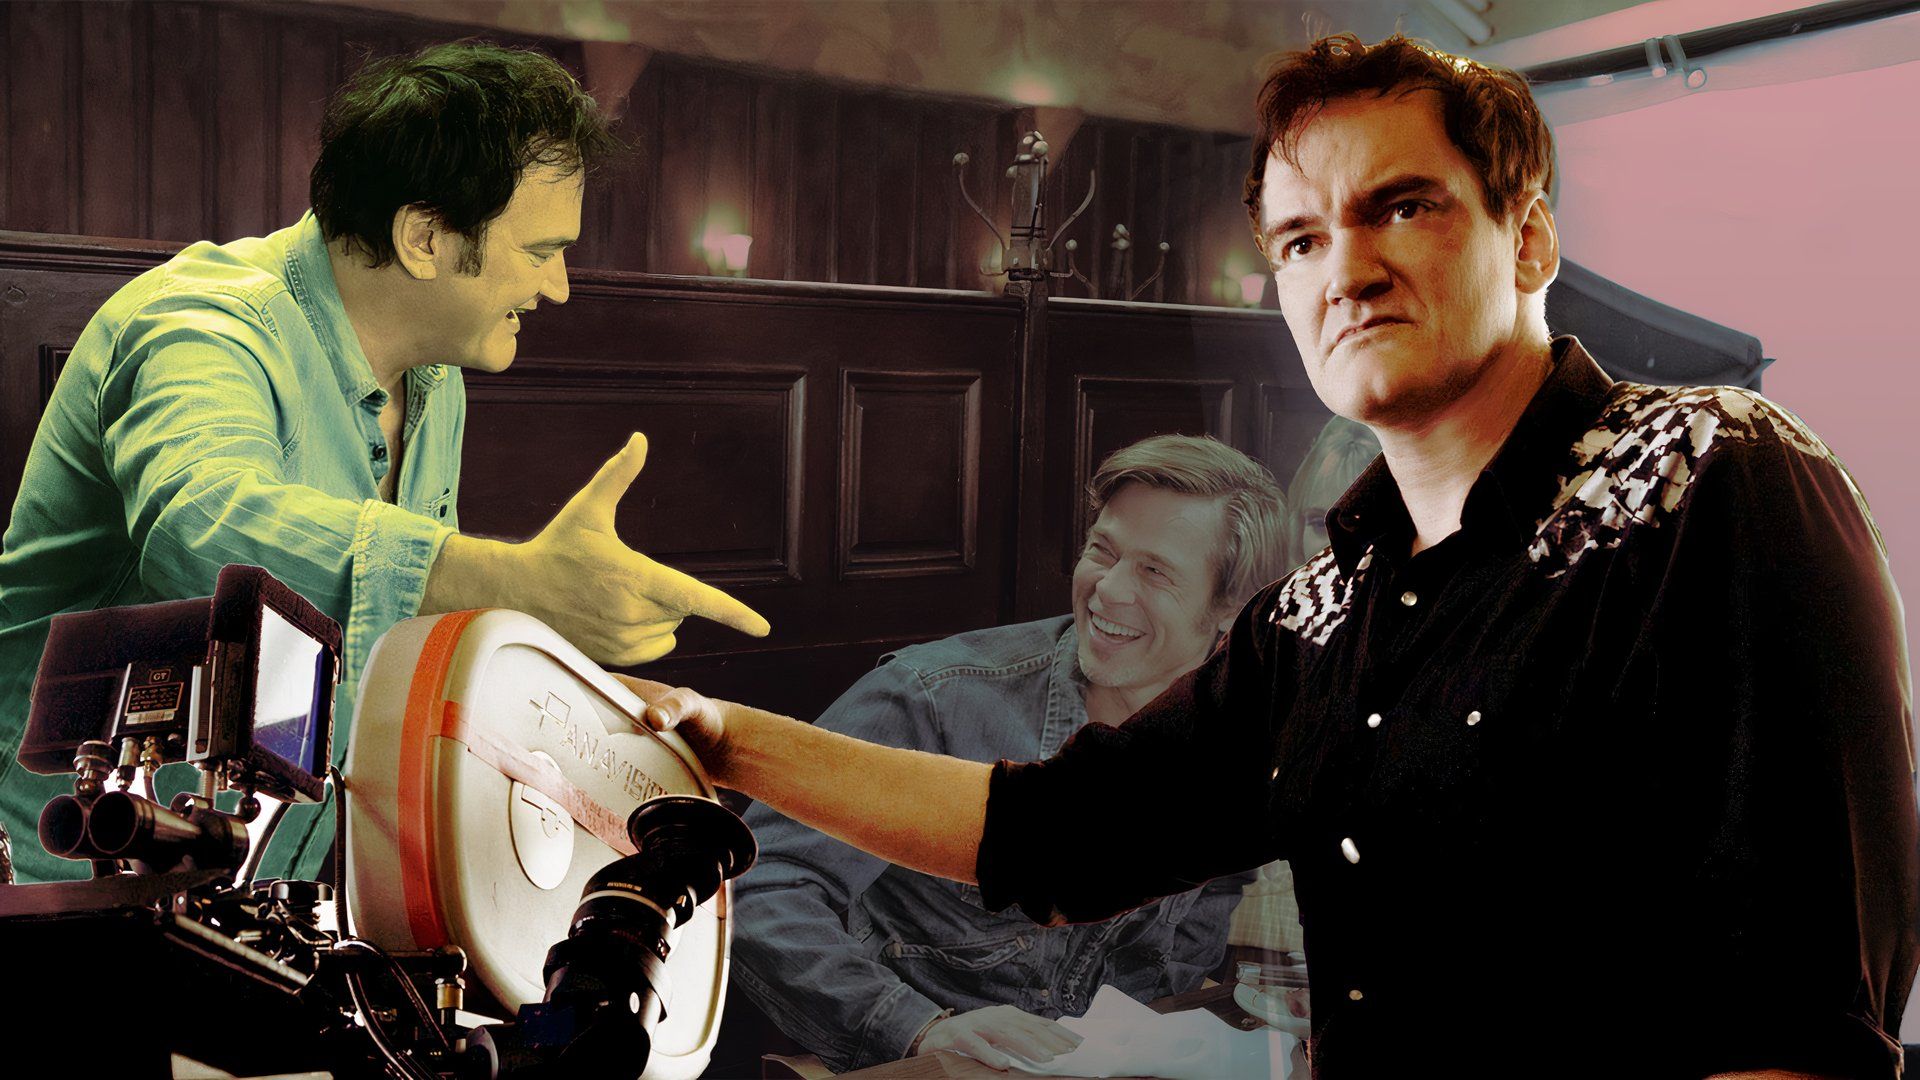 An edited image of Quentin Tarantino talking with Brad Pitt and filming a movie 